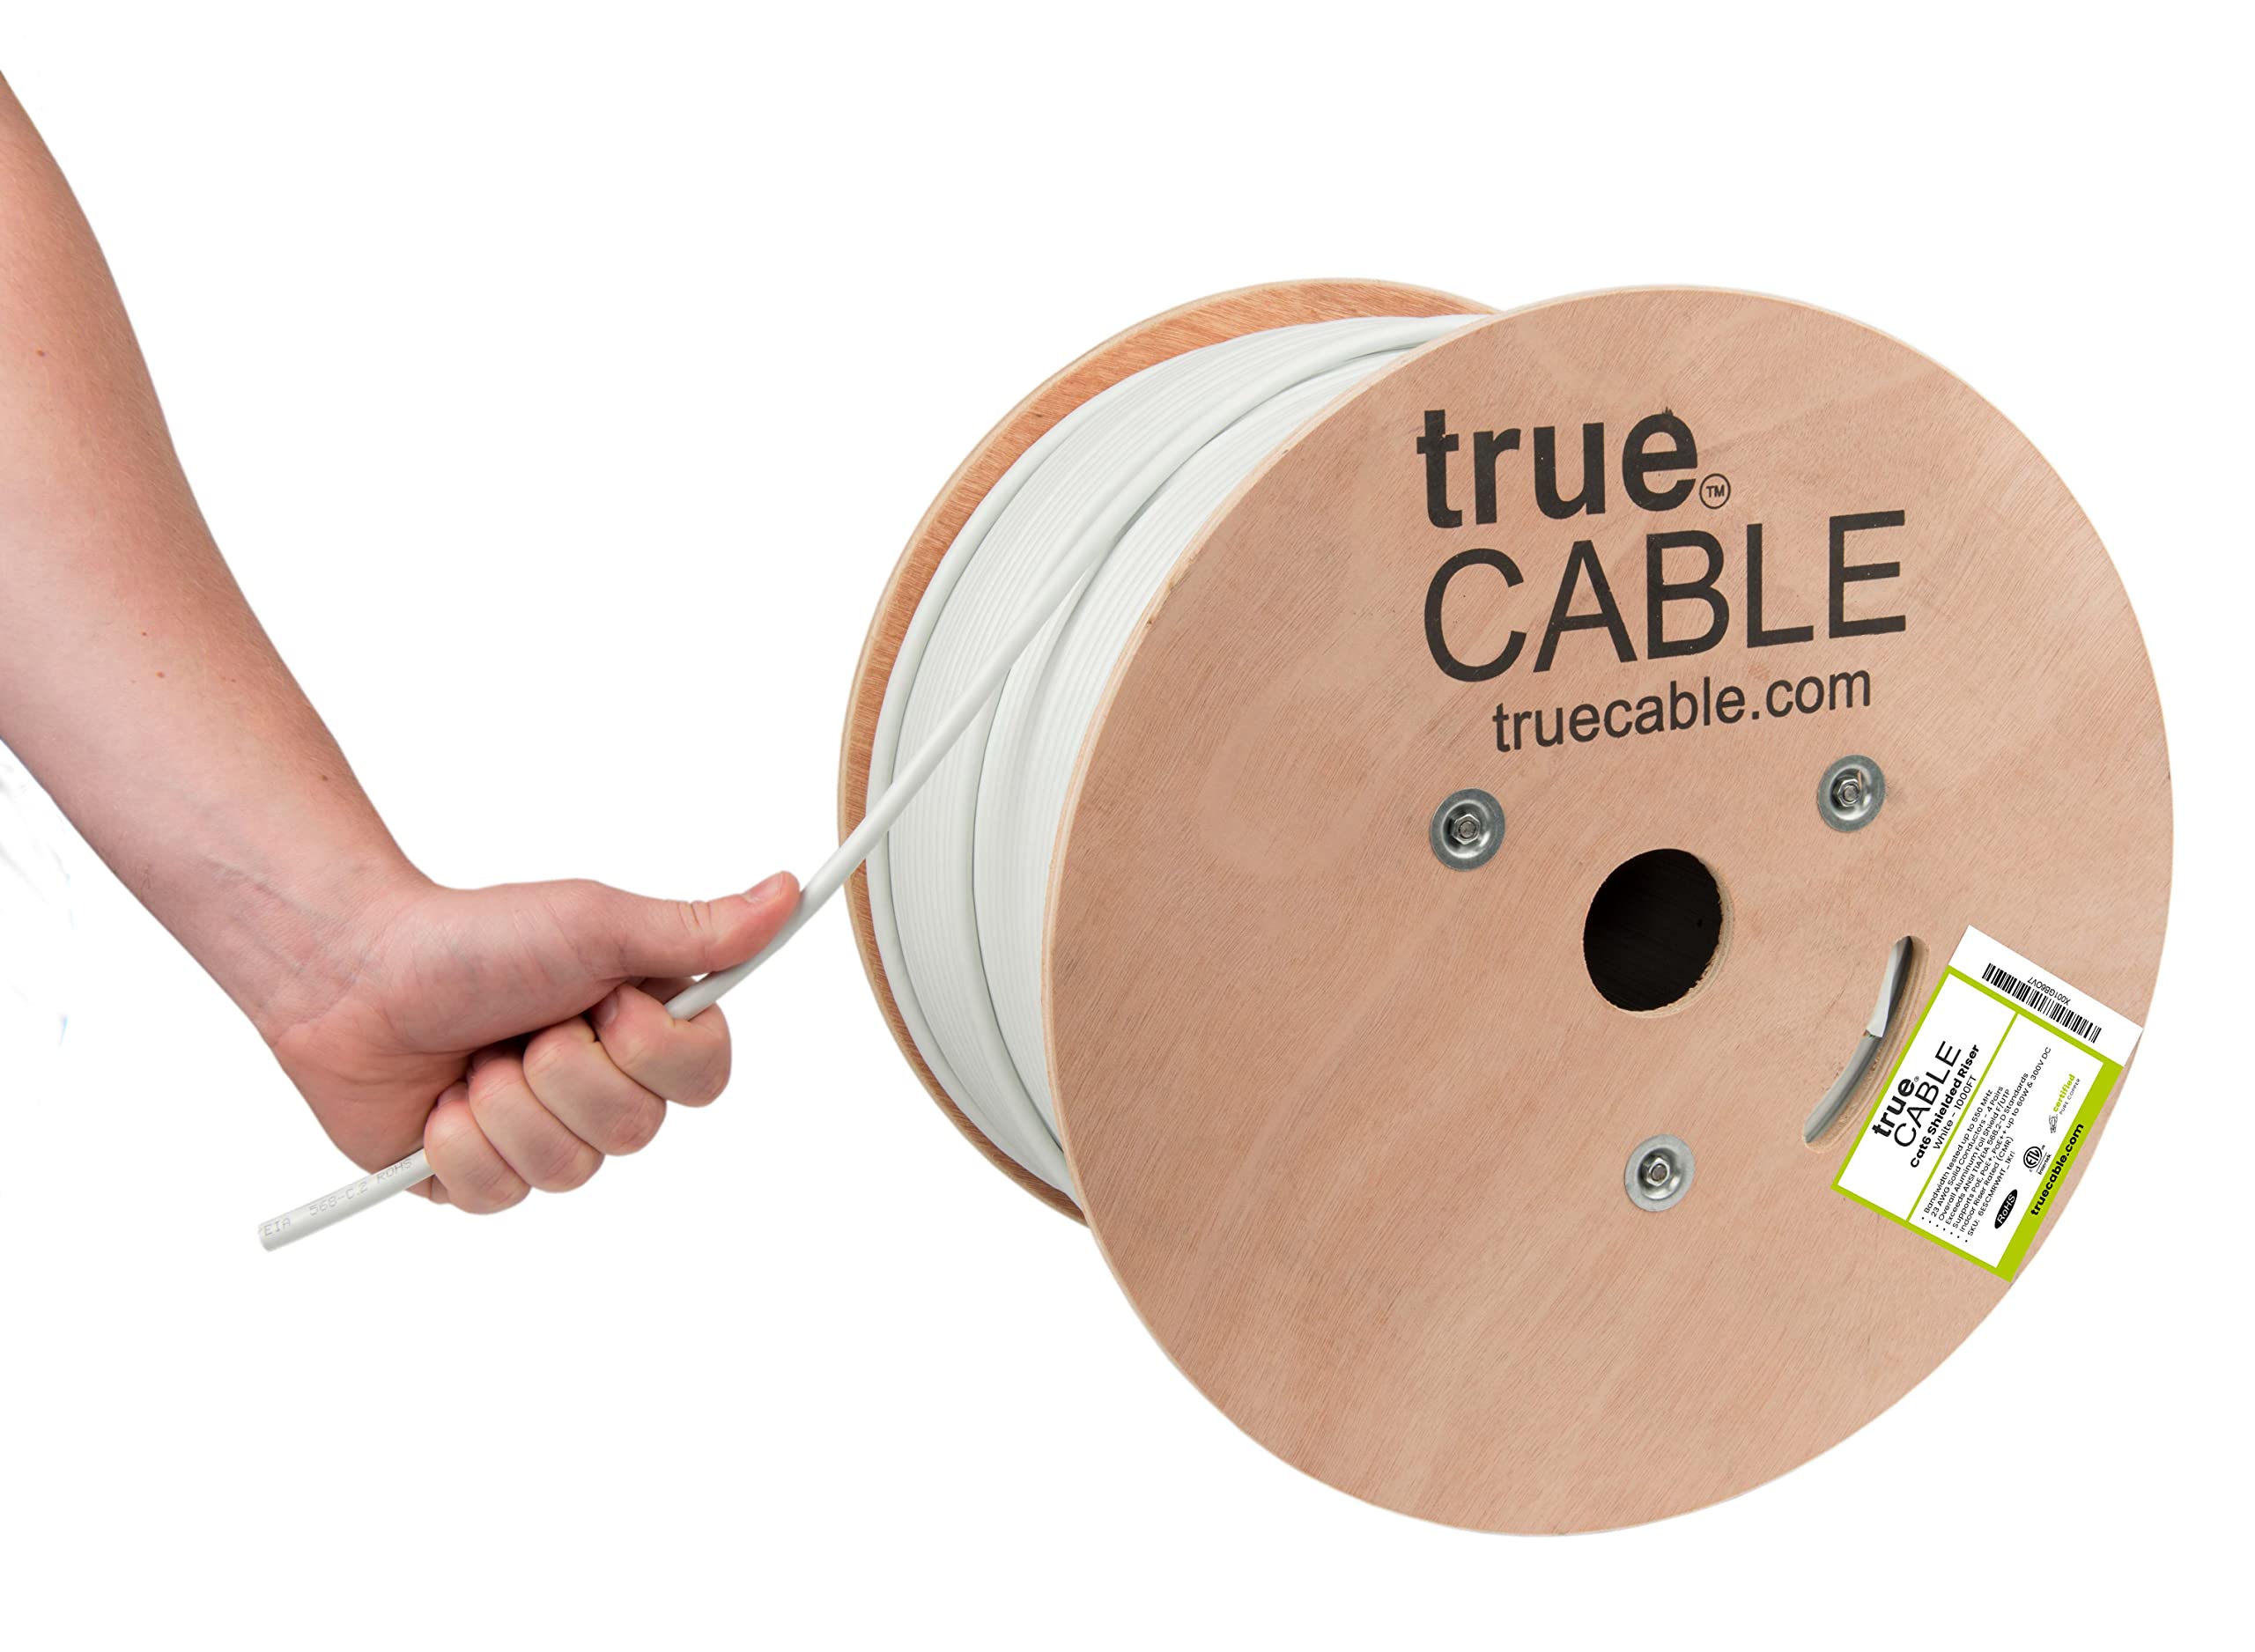 True Cable truecABLE cat6 Shielded Riser (cMR), 1000ft, White, 23AWg Solid Bare copper, 550MHz, PoE++ (4PPoE), ETL Listed, Overall Foil Shi